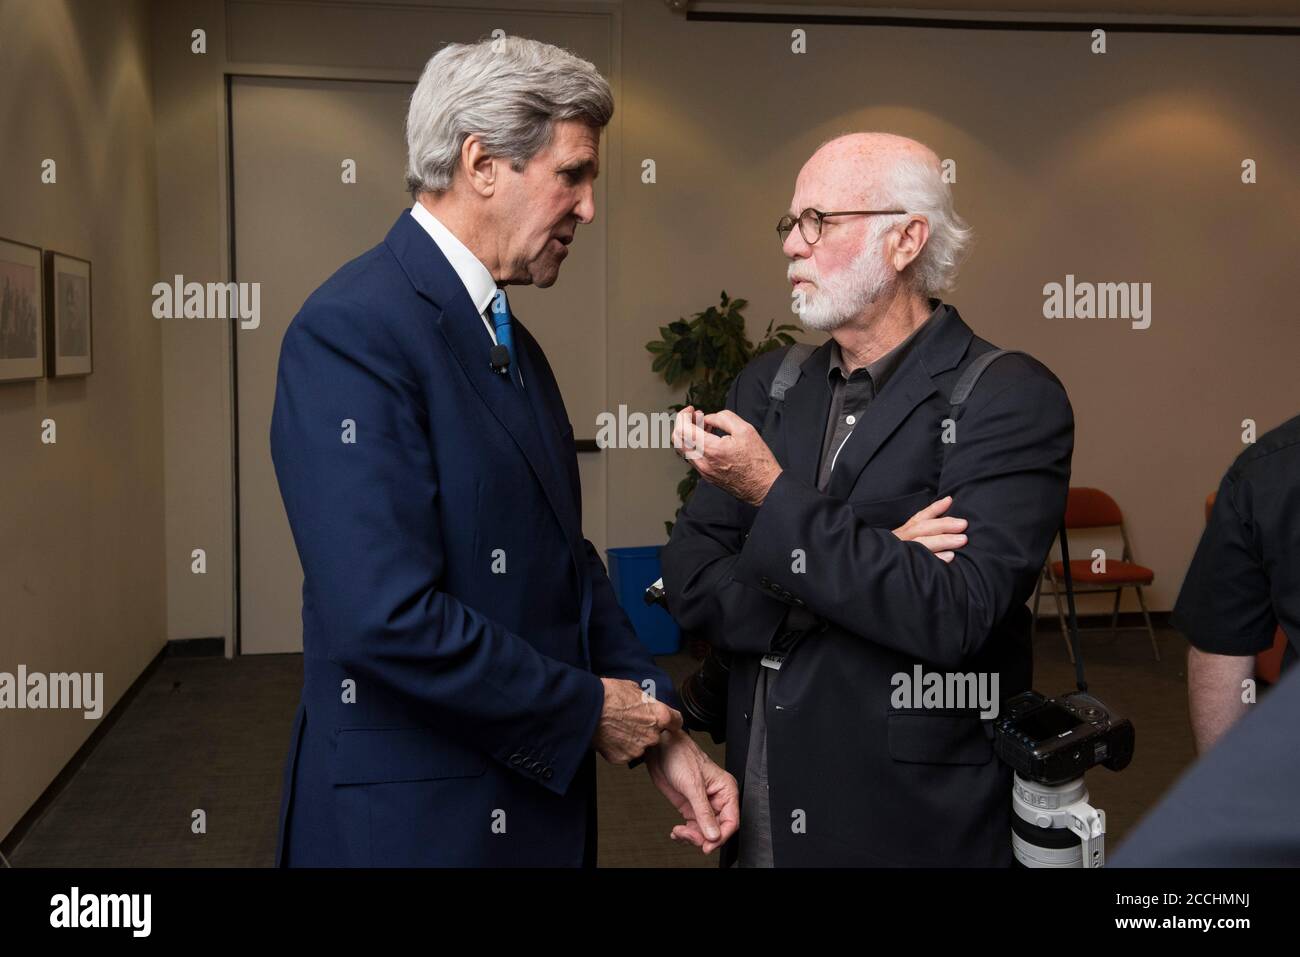 U.S. Secretary of State John Kerry, left, a Vietnam War veteran, chats with Pulitzer prize-winning photojournalist David Hume Kennerly prior to a panel discussion on the Vietnam War at the LBJ Presidential Library April 27, 2016 in Austin, Texas. Stock Photo